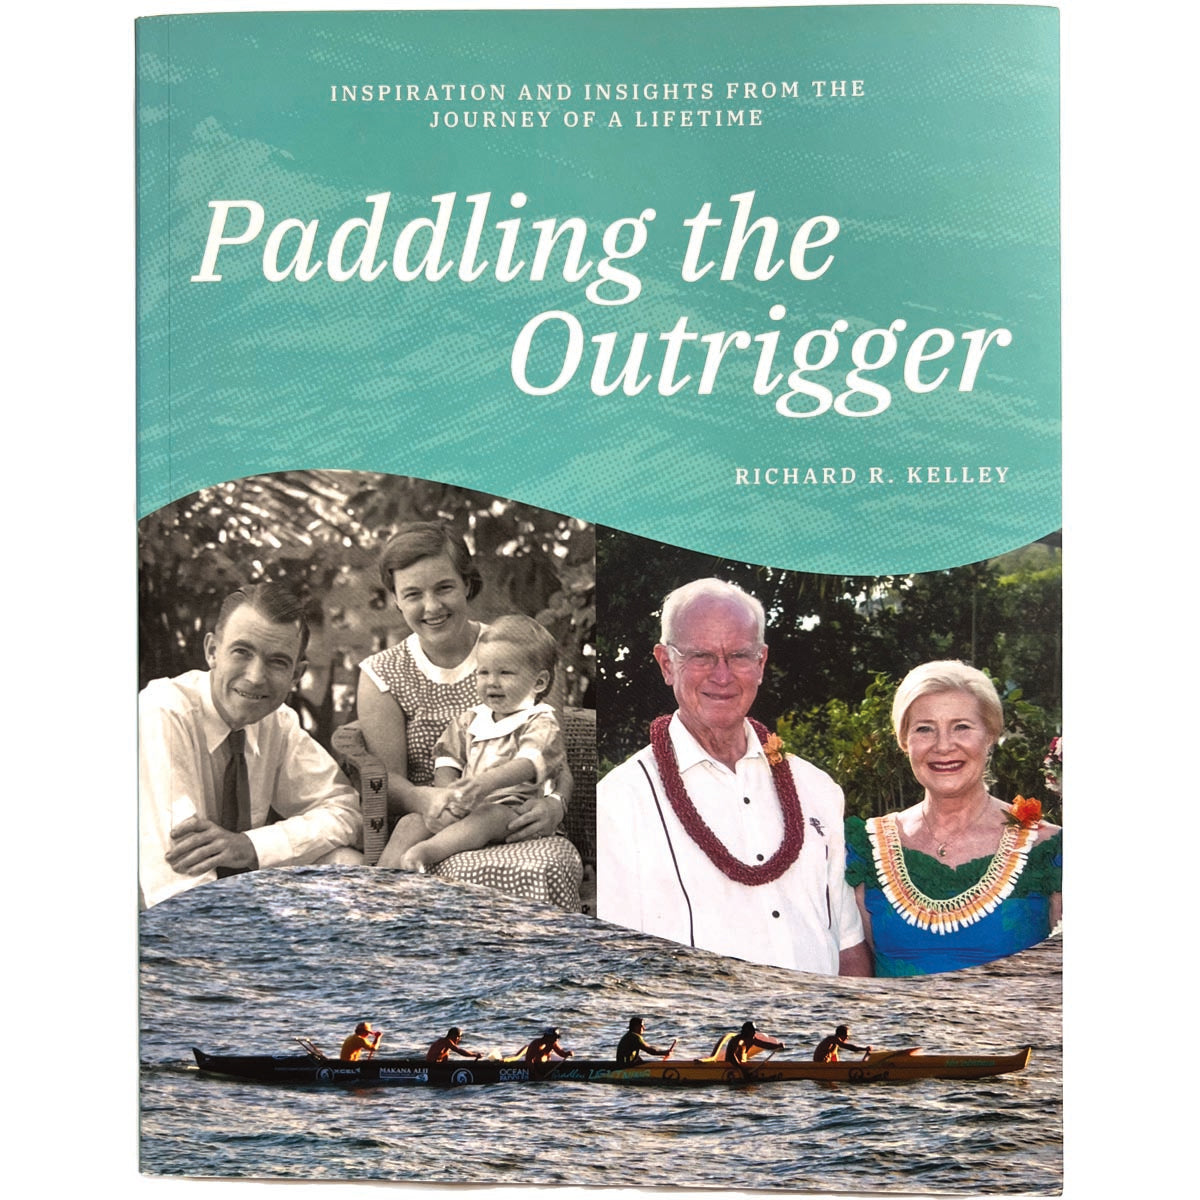 Paddling The Outrigger: Inspiration and Insights from The Journey of a Lifetime